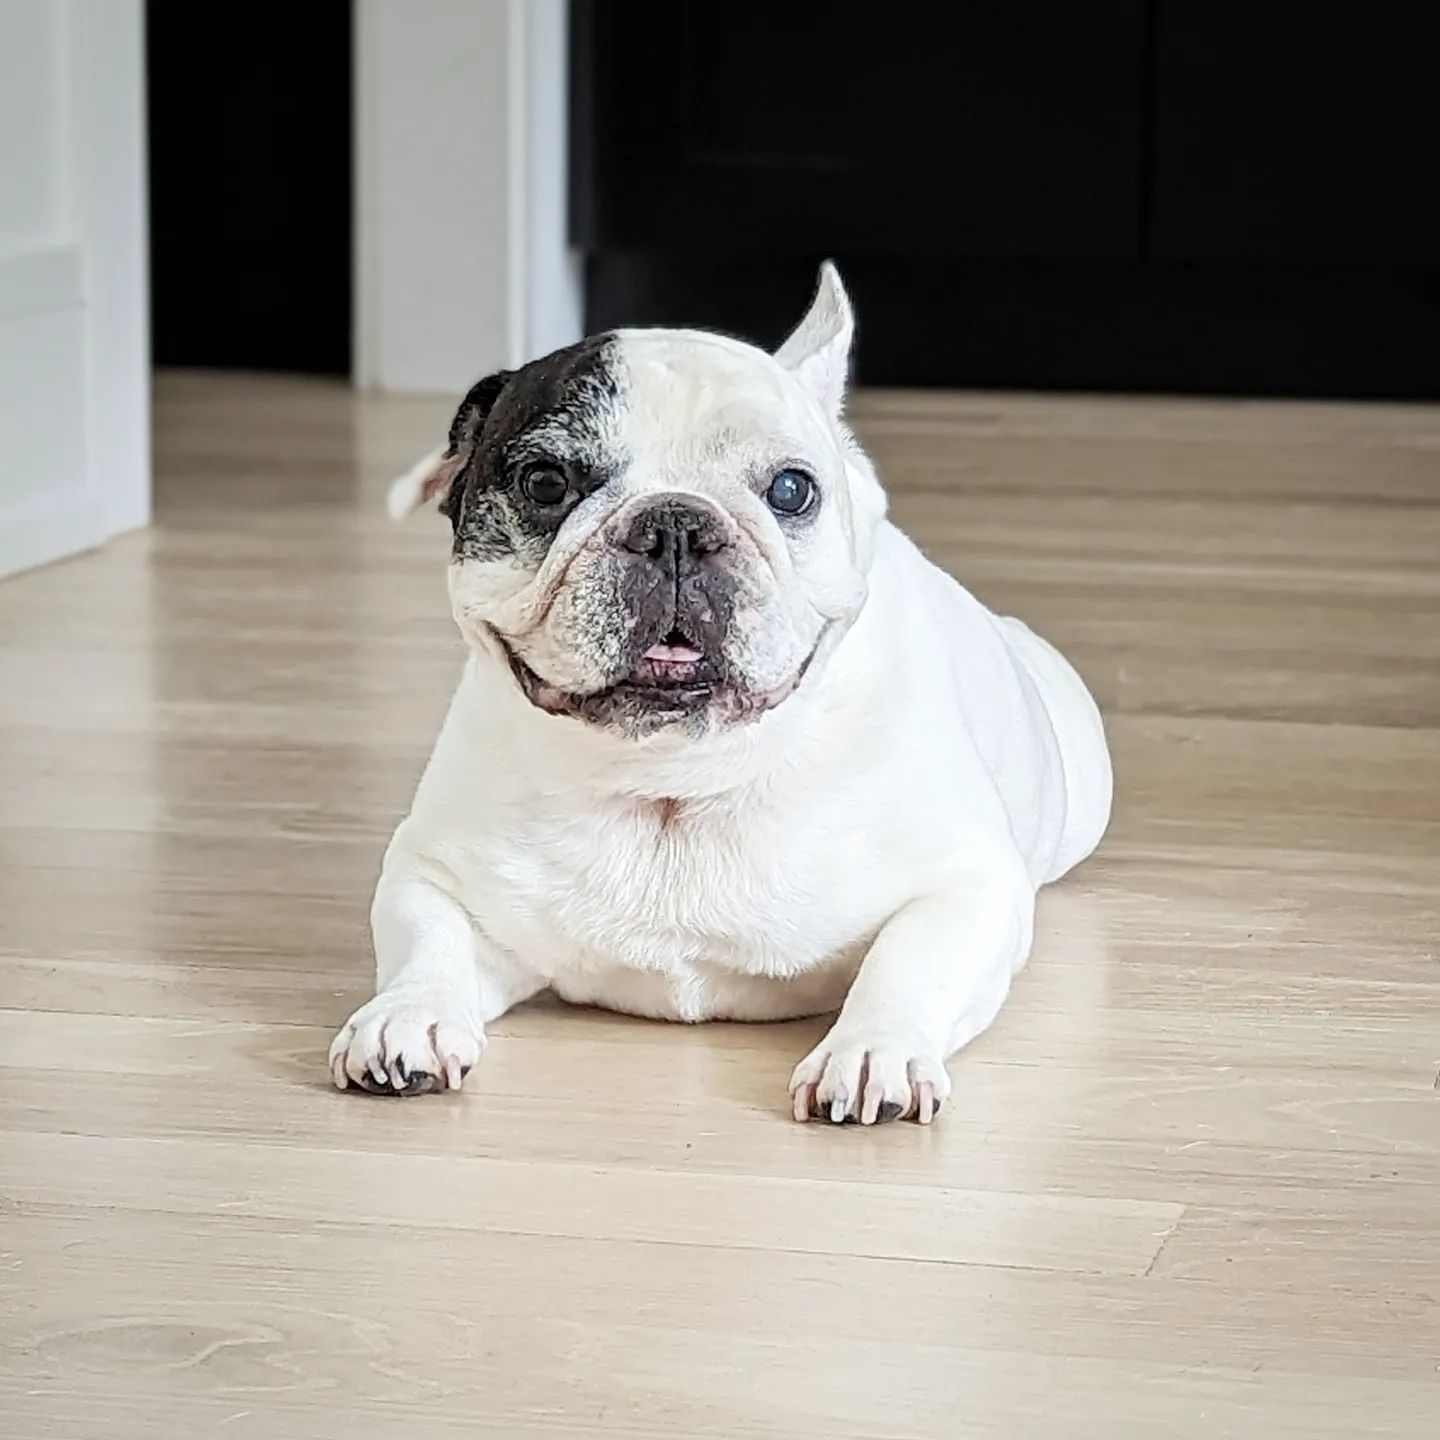 Dog That Has Almost 10 Million Followers On Instagram - Manny the French Bulldog